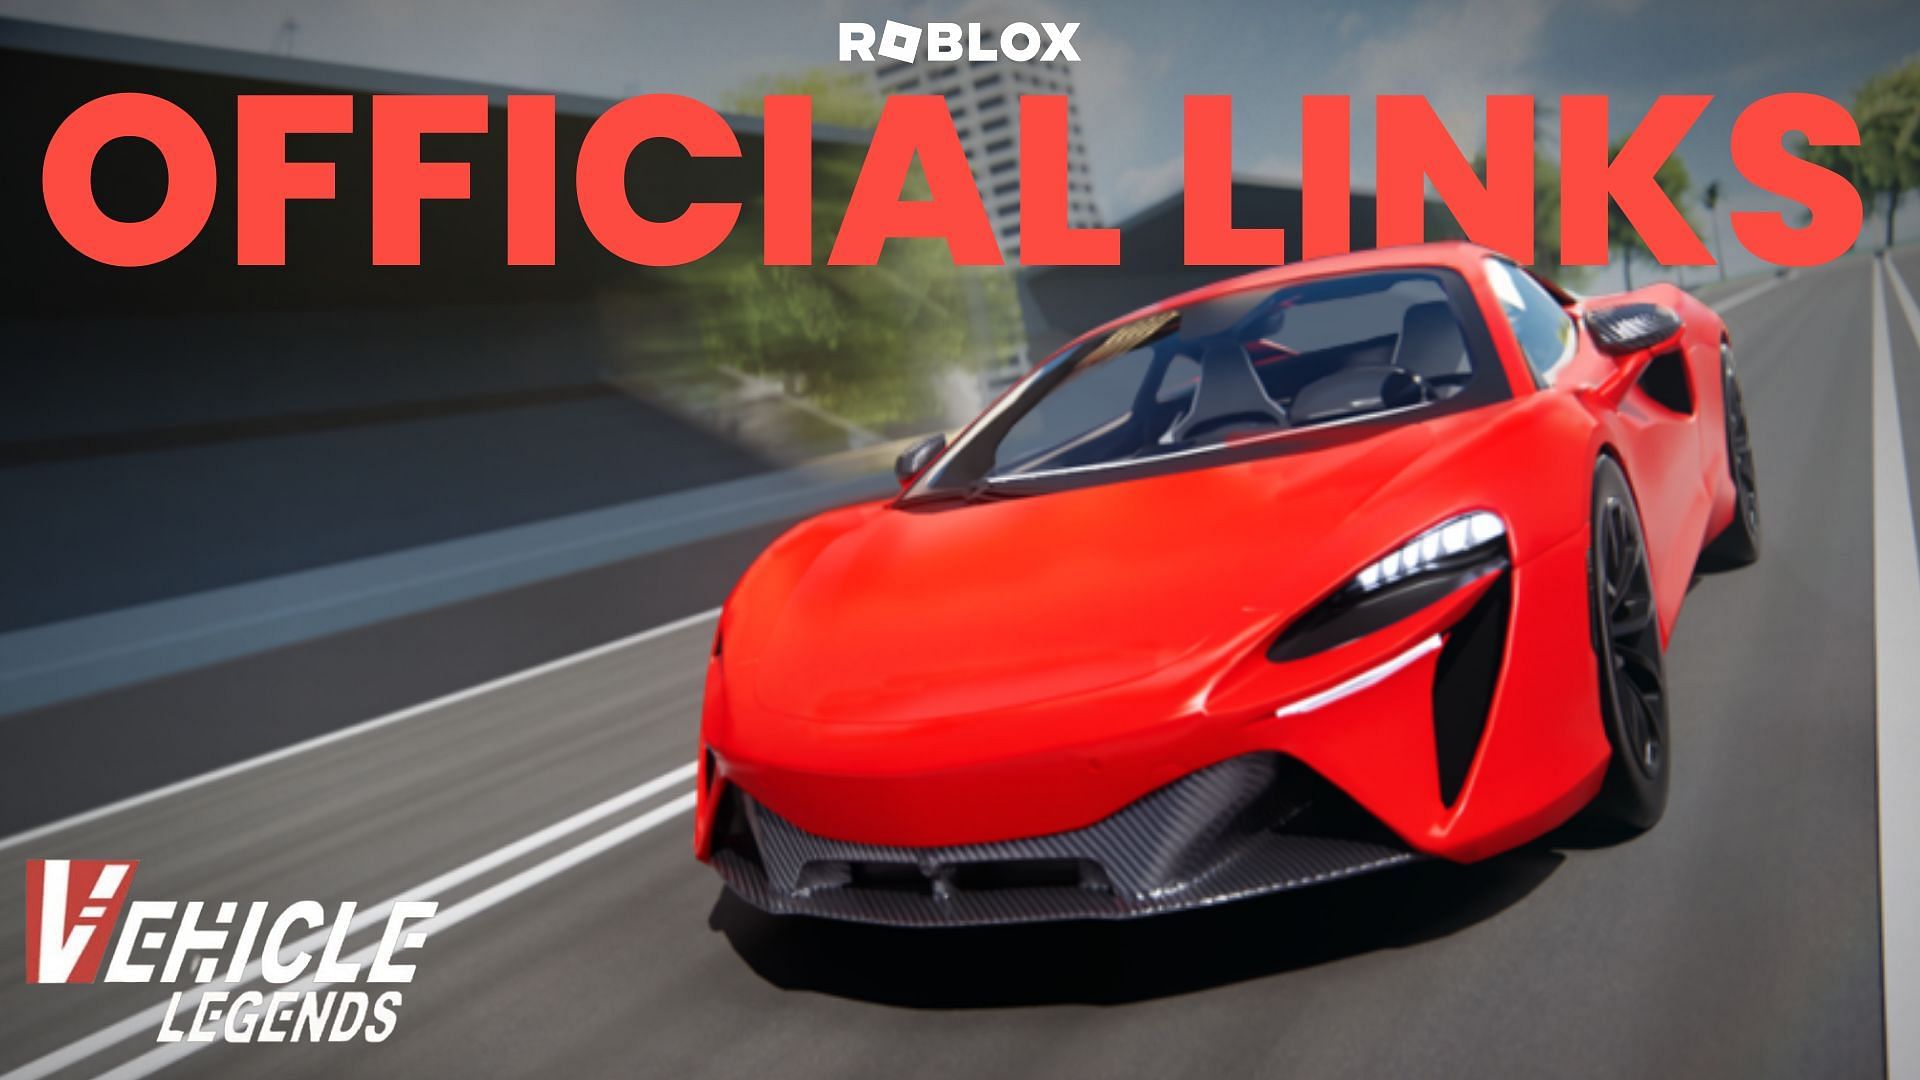 Here are all the official links for Vehicle Legends (Image via Roblox)